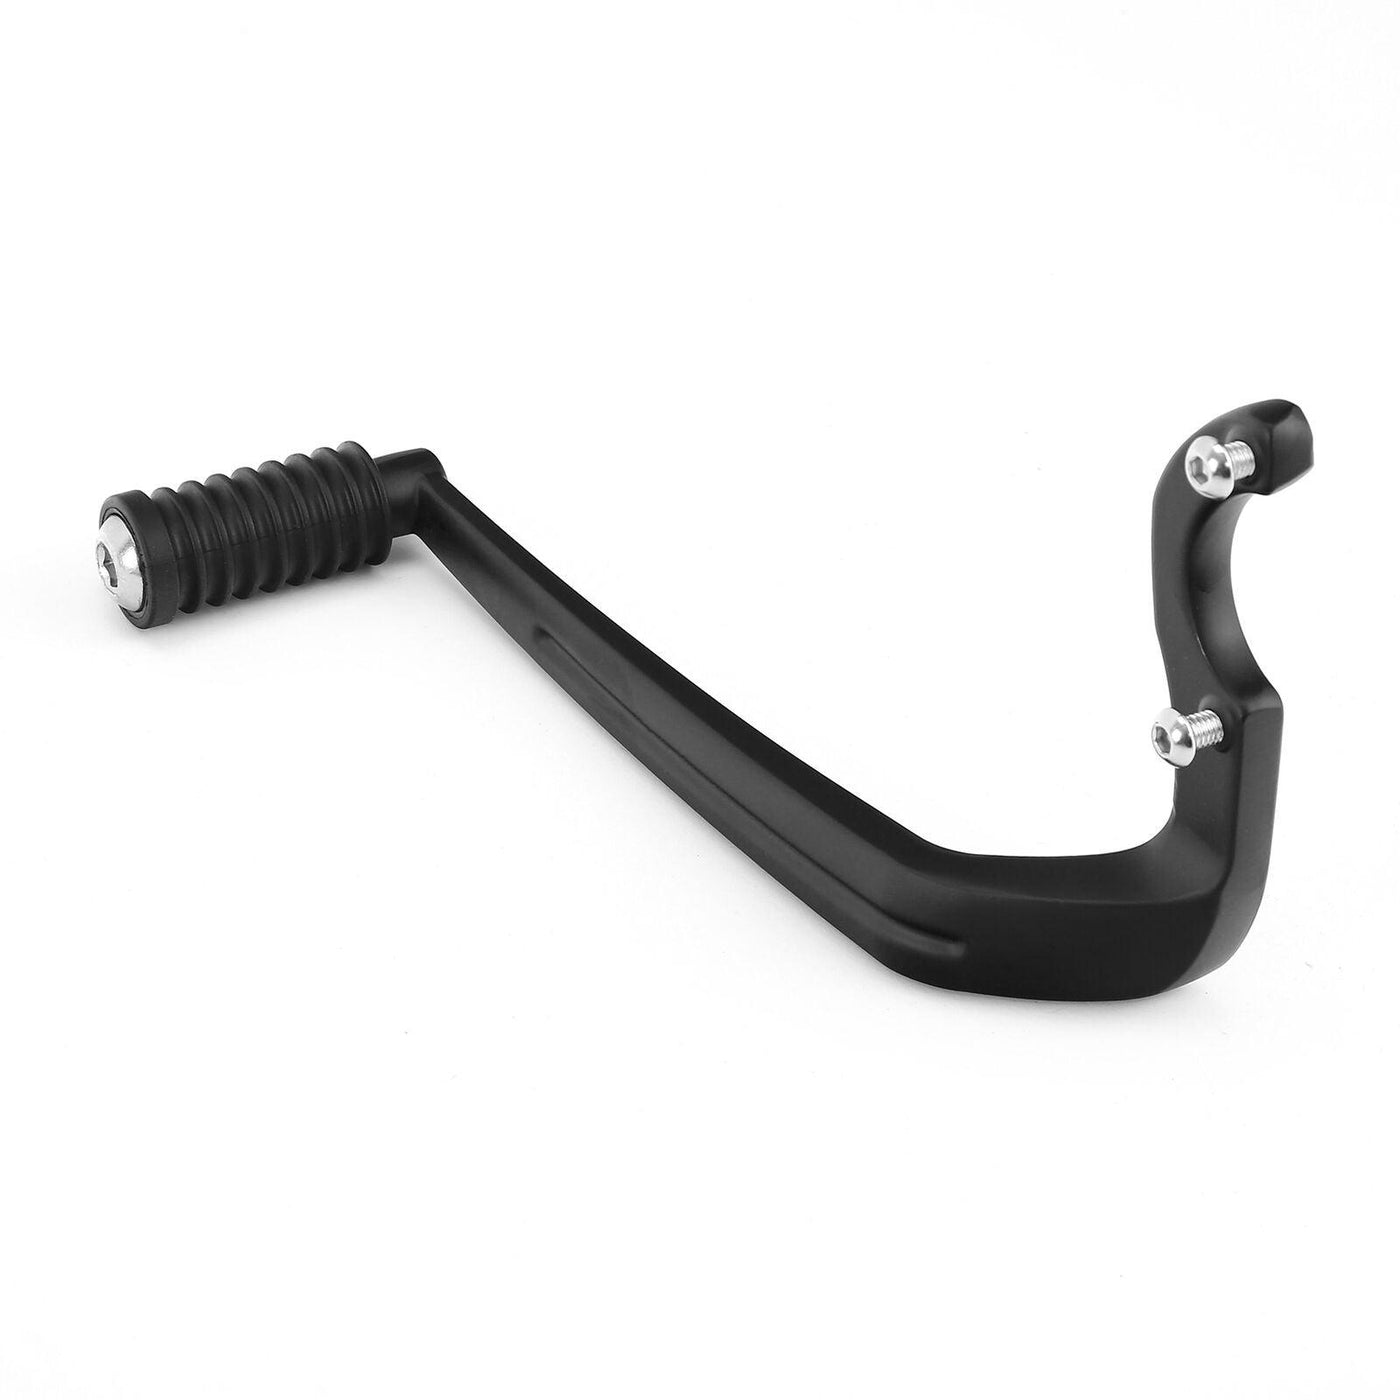 Black Heel Shifter Fit For Indian Chief Classic 14-18 Chieftain Dark Horse 16-20 - Moto Life Products